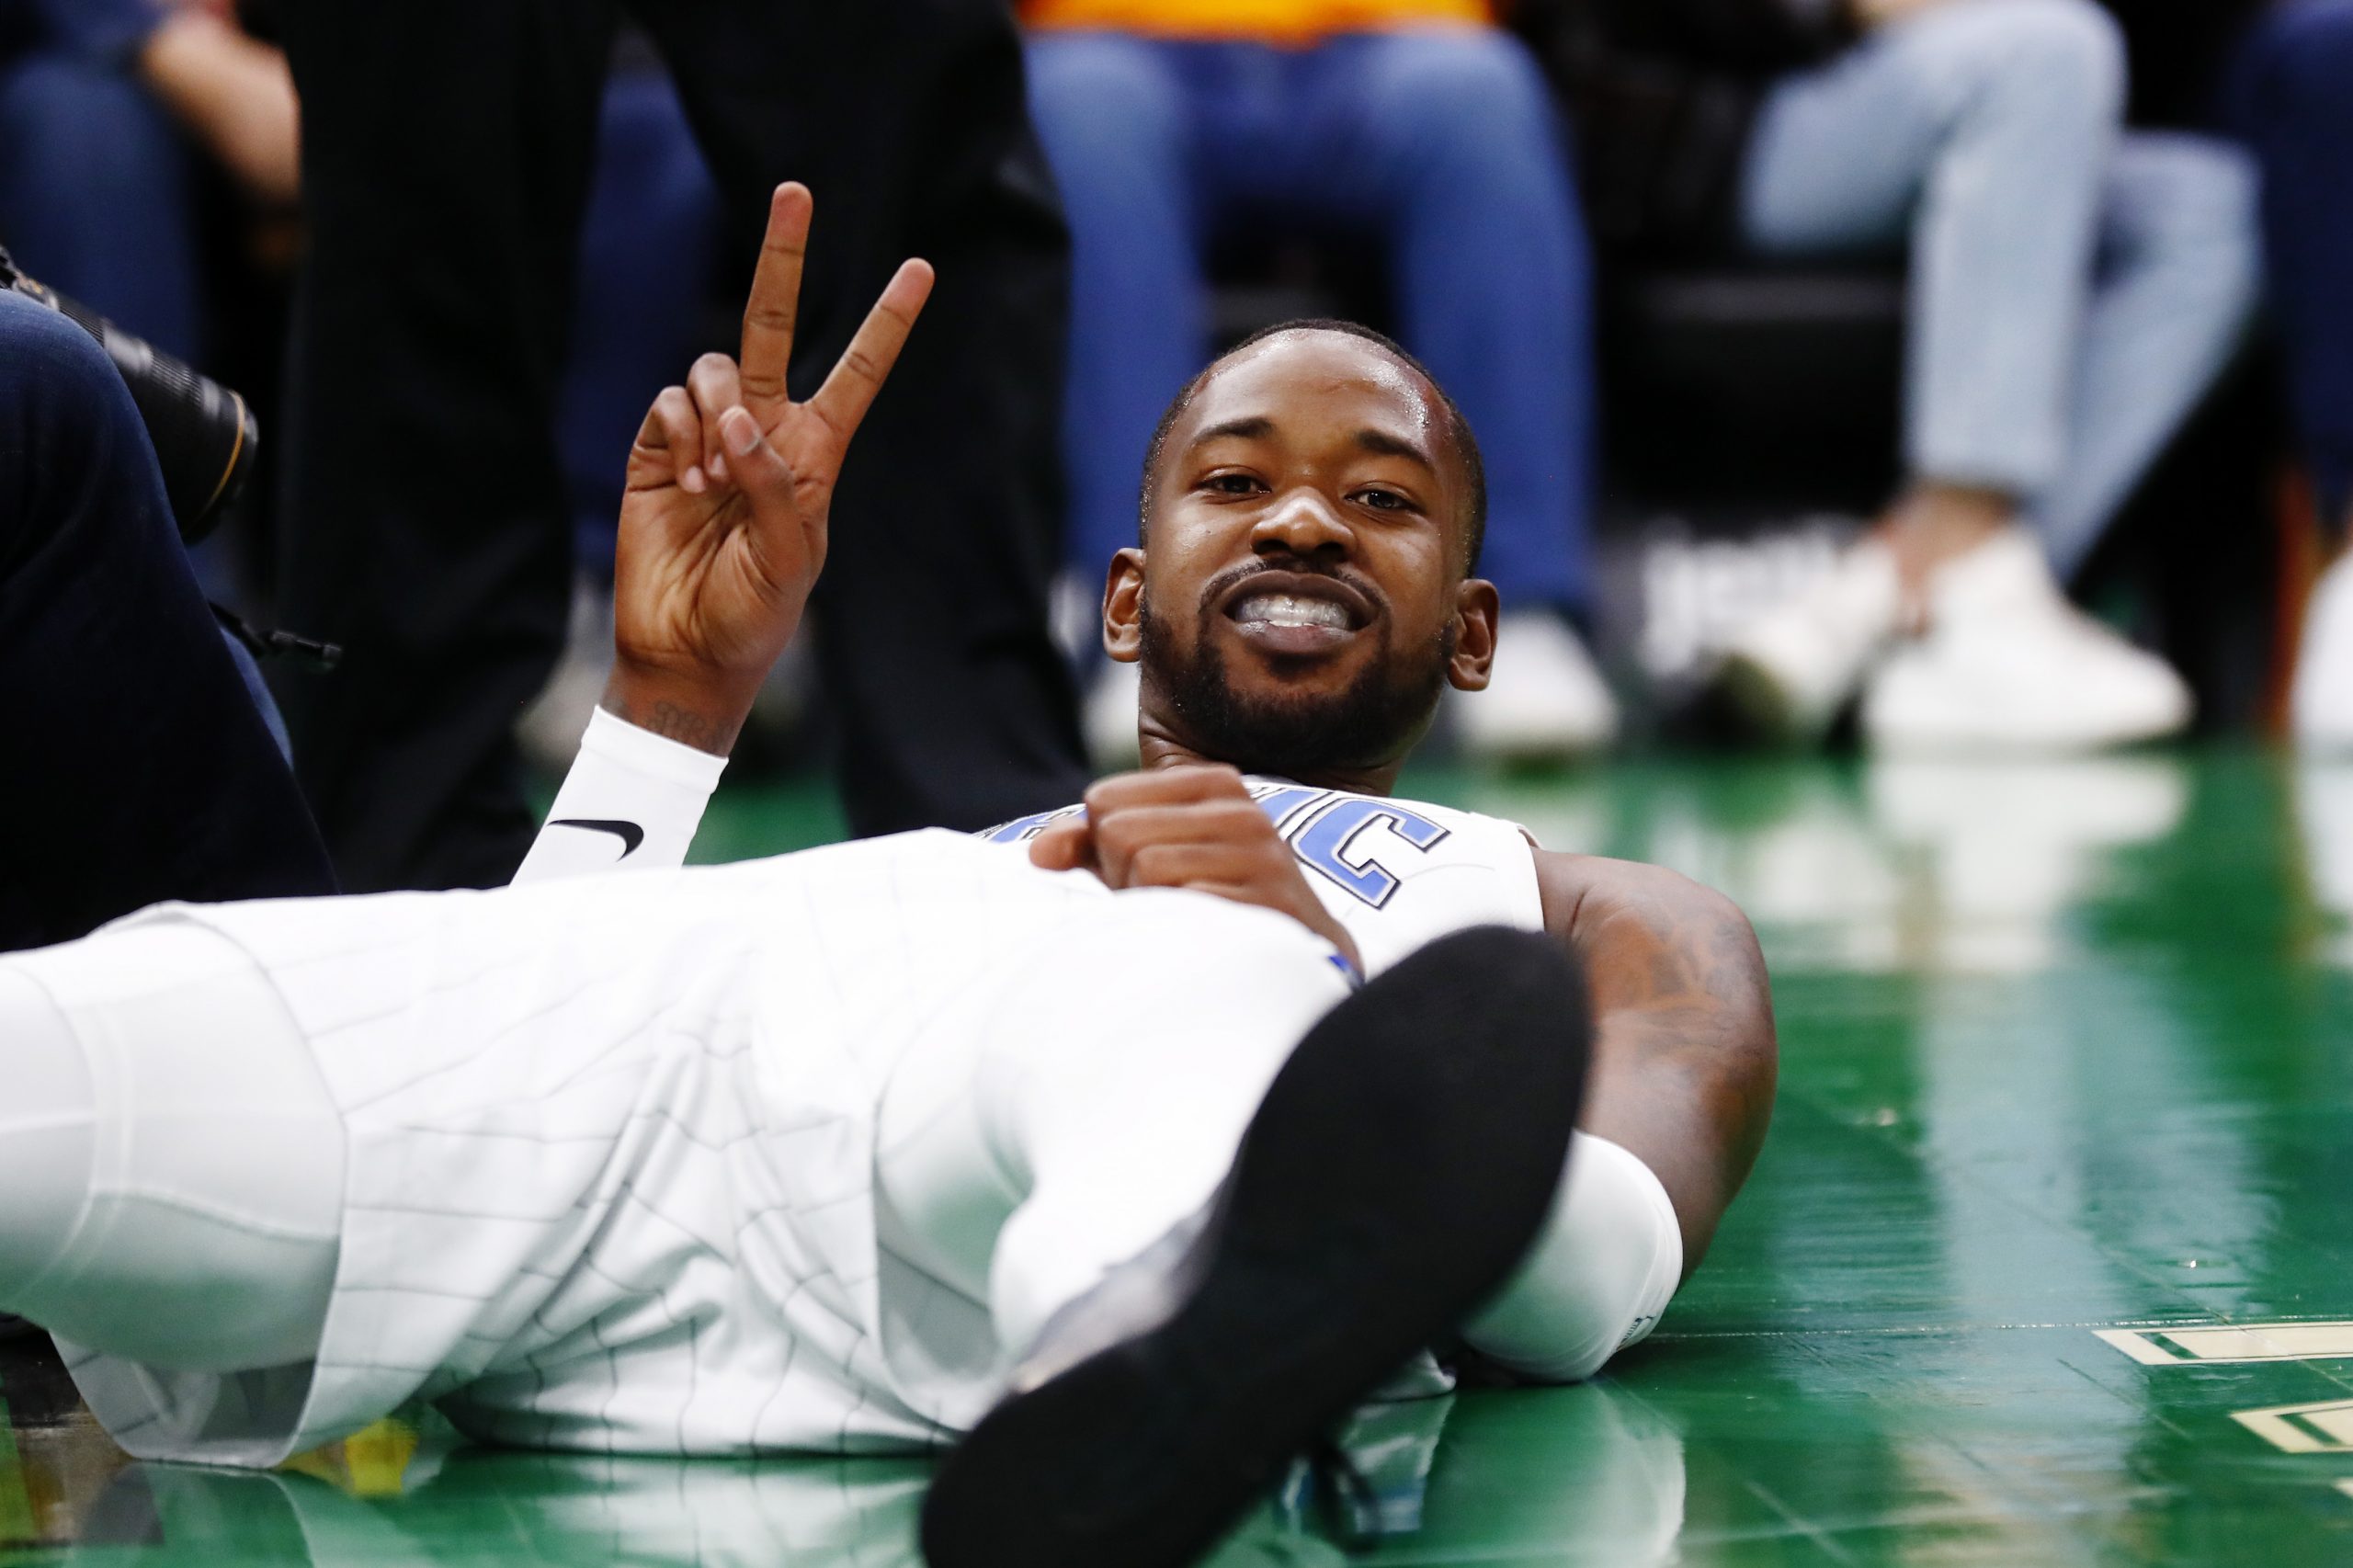 Orlando Magic Guard Terrence Ross Shows Why He Should be a Top Target at the NBA Trade Deadline